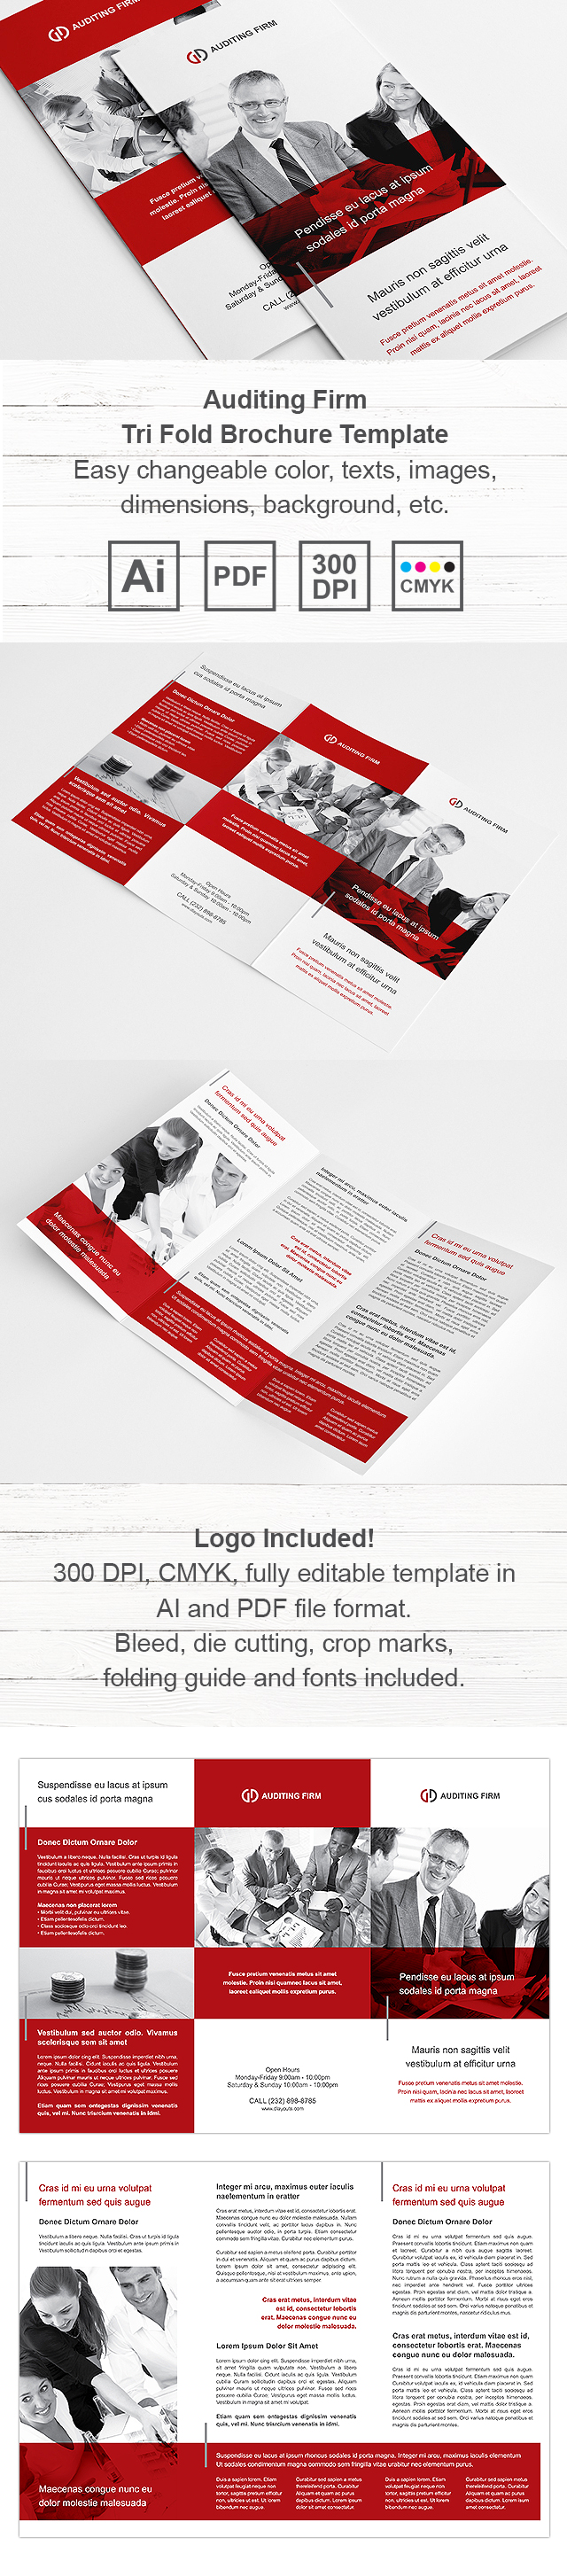 Auditing Firm Tri Fold Brochure Template